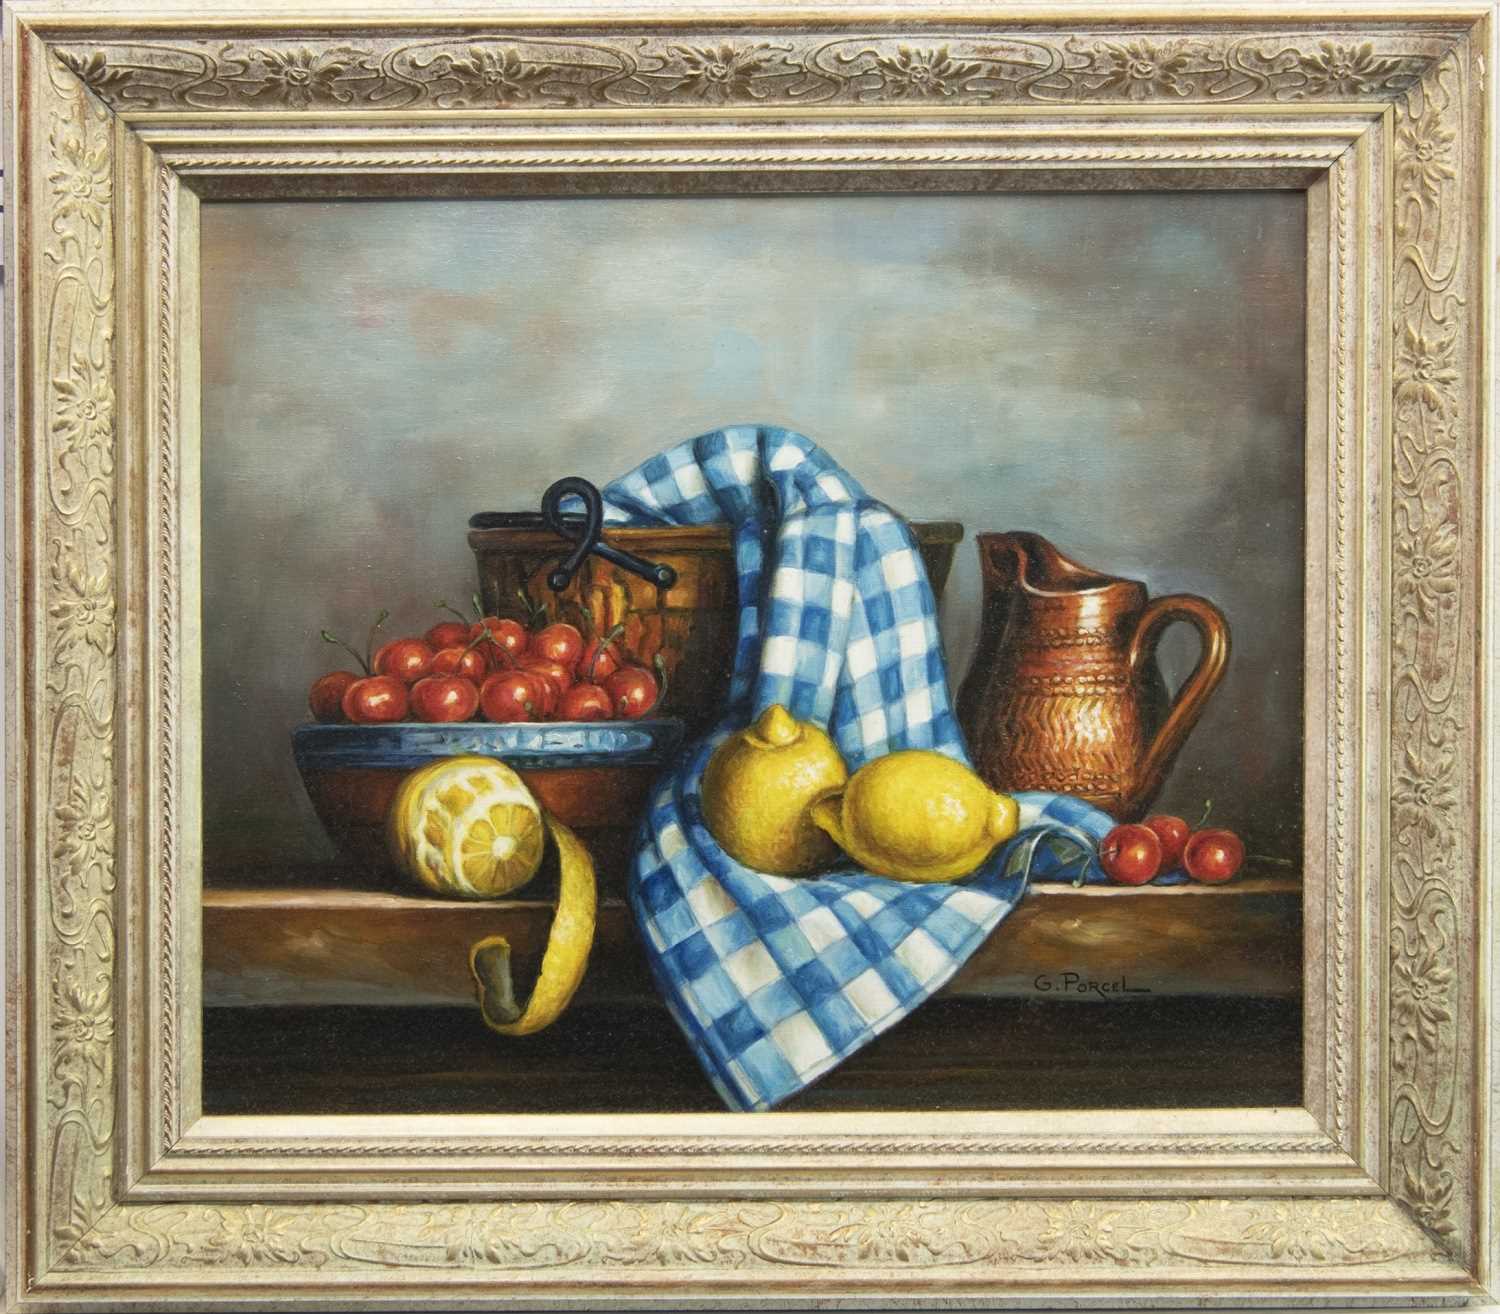 Lot 20 - STILL LIFE WITH FRUIT, AN OIL BY GEORGES PORCEL